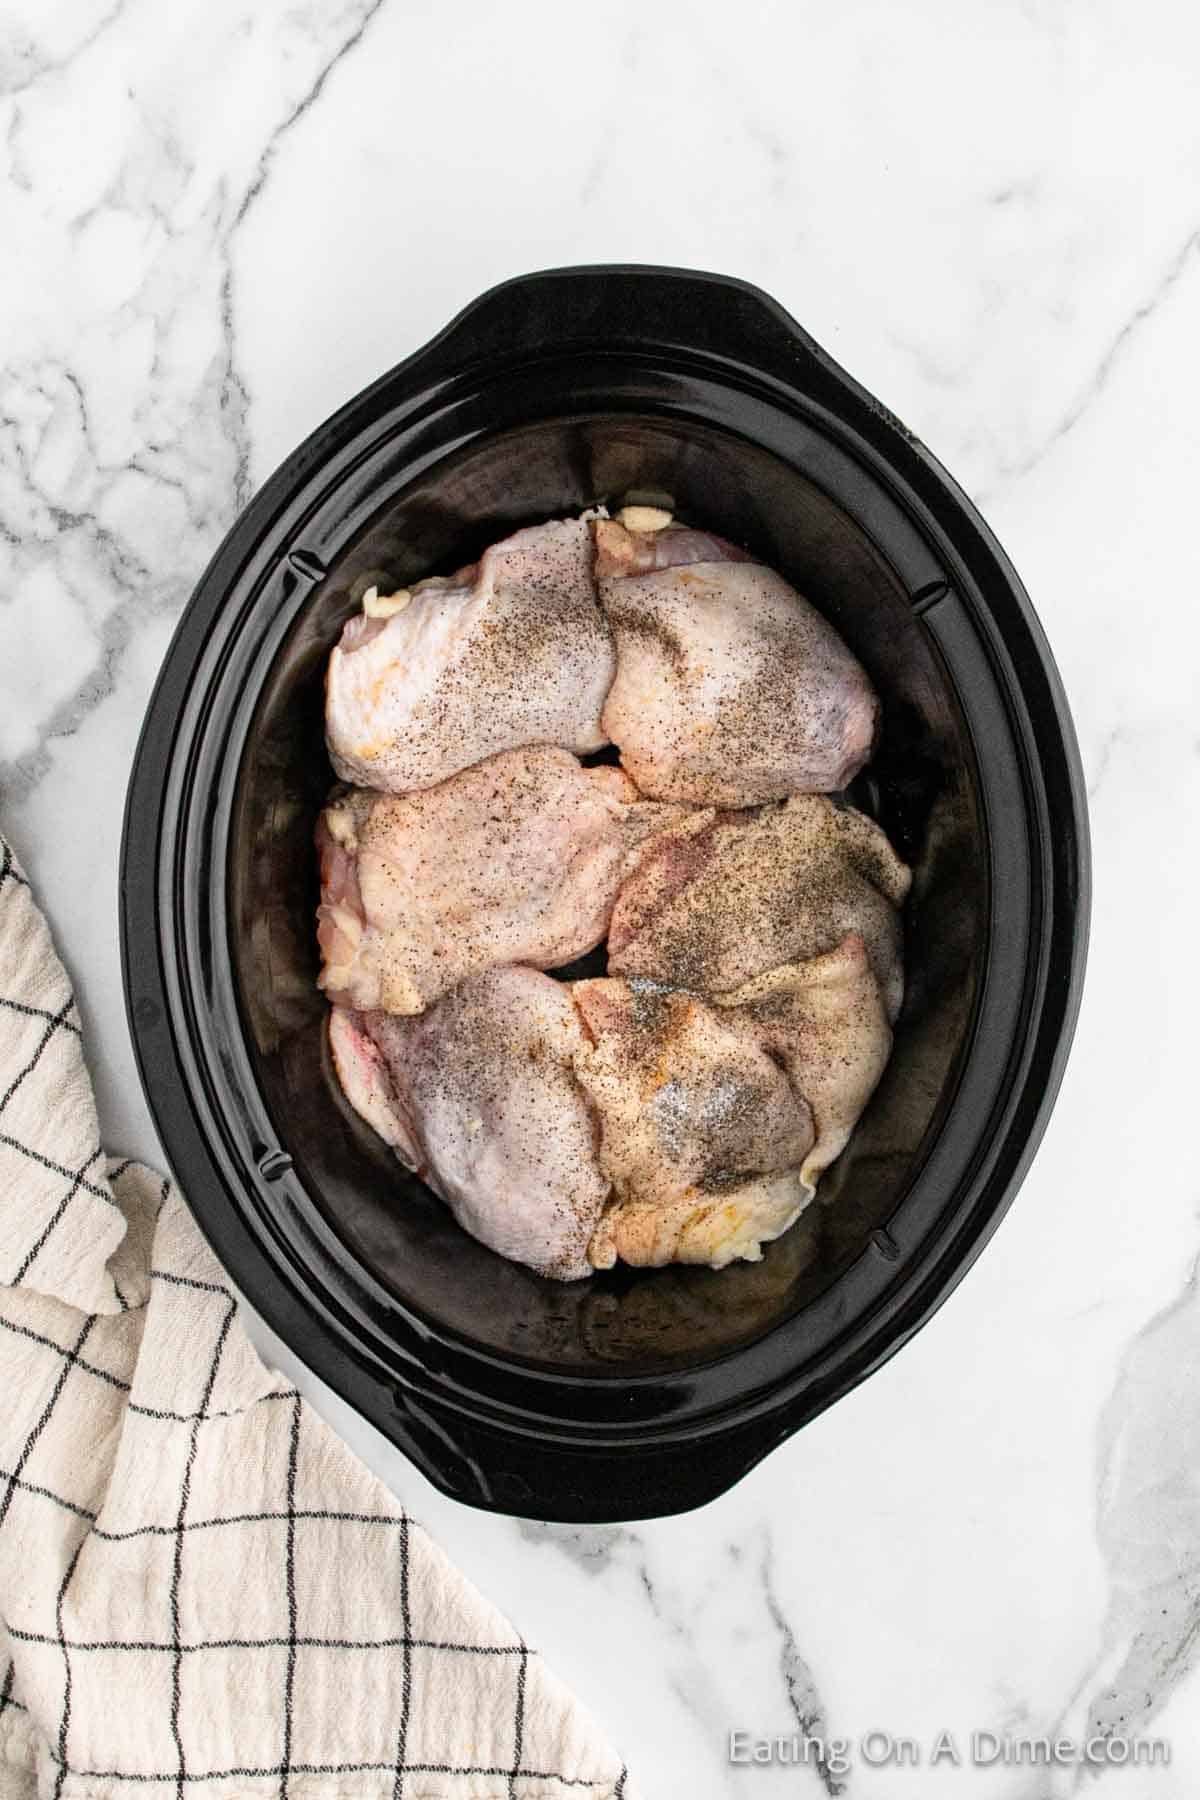 Placing chicken thighs in the slow cooker topped with salt and pepper